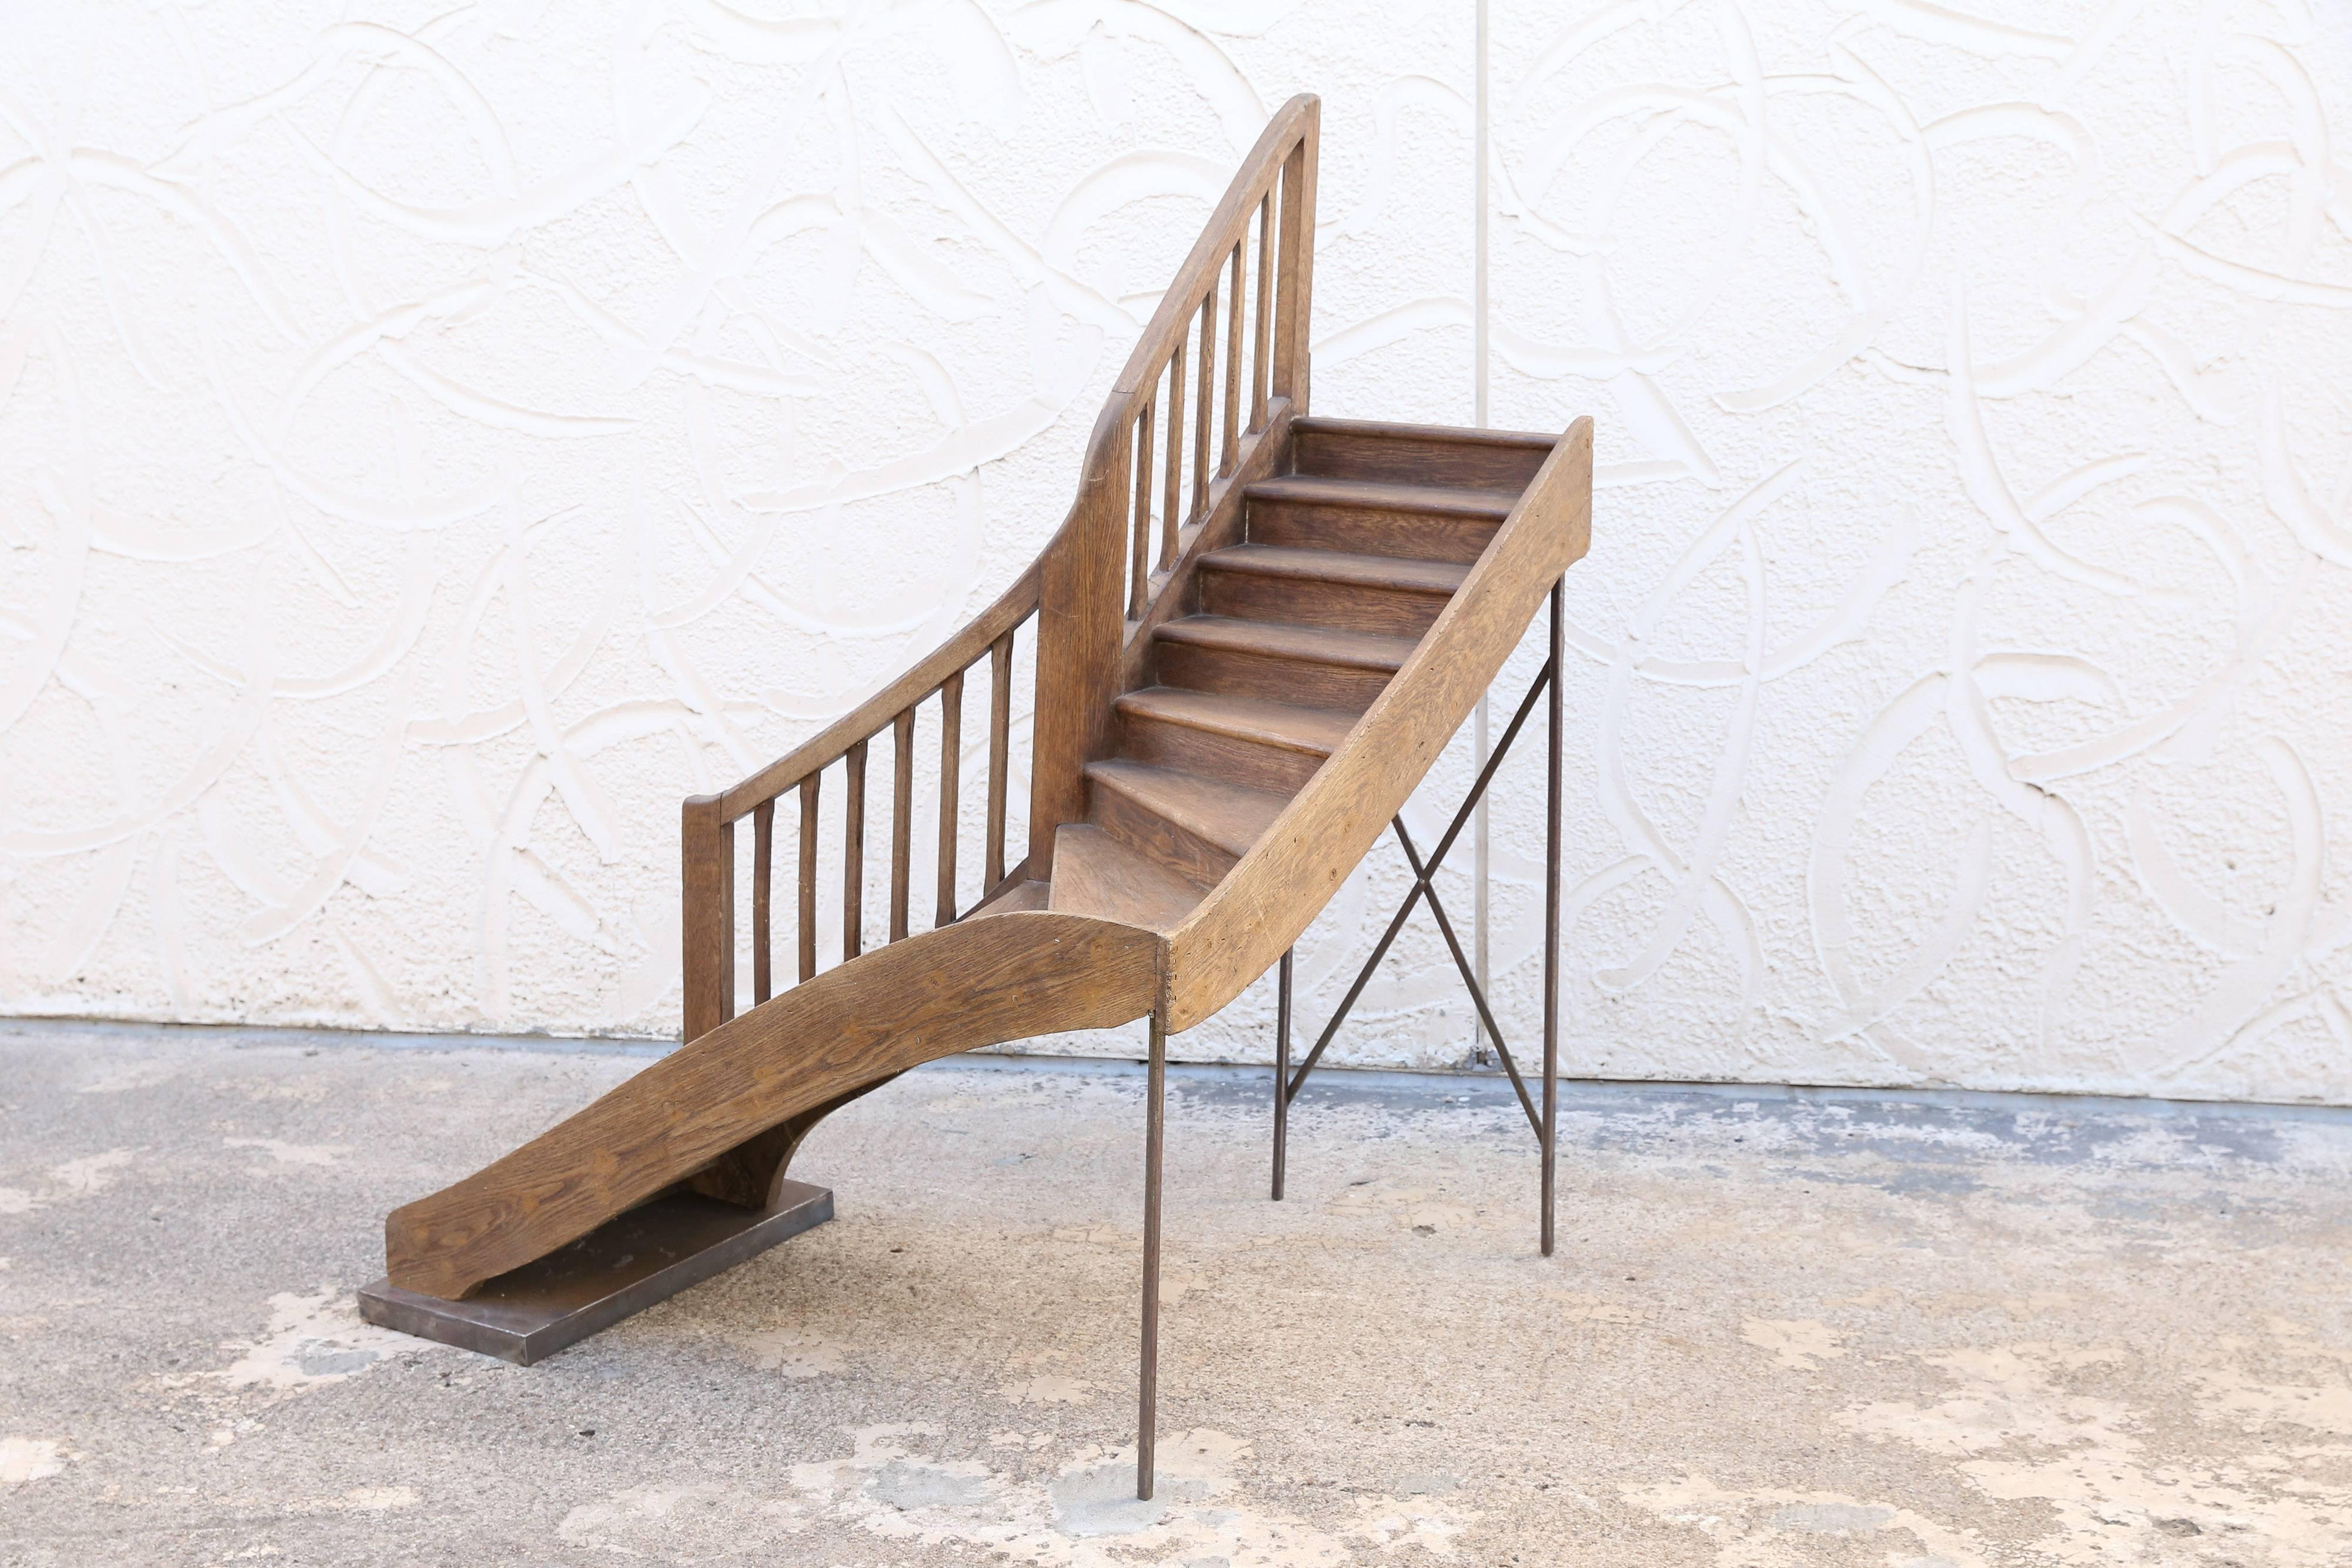 A beautifully constructed wooden staircase model resting on a metal base and legs. The graceful curve of the railing and the bullnose tread nosing are testament to the maker's skills. While perfect for displaying plants or objects d'art, it is when